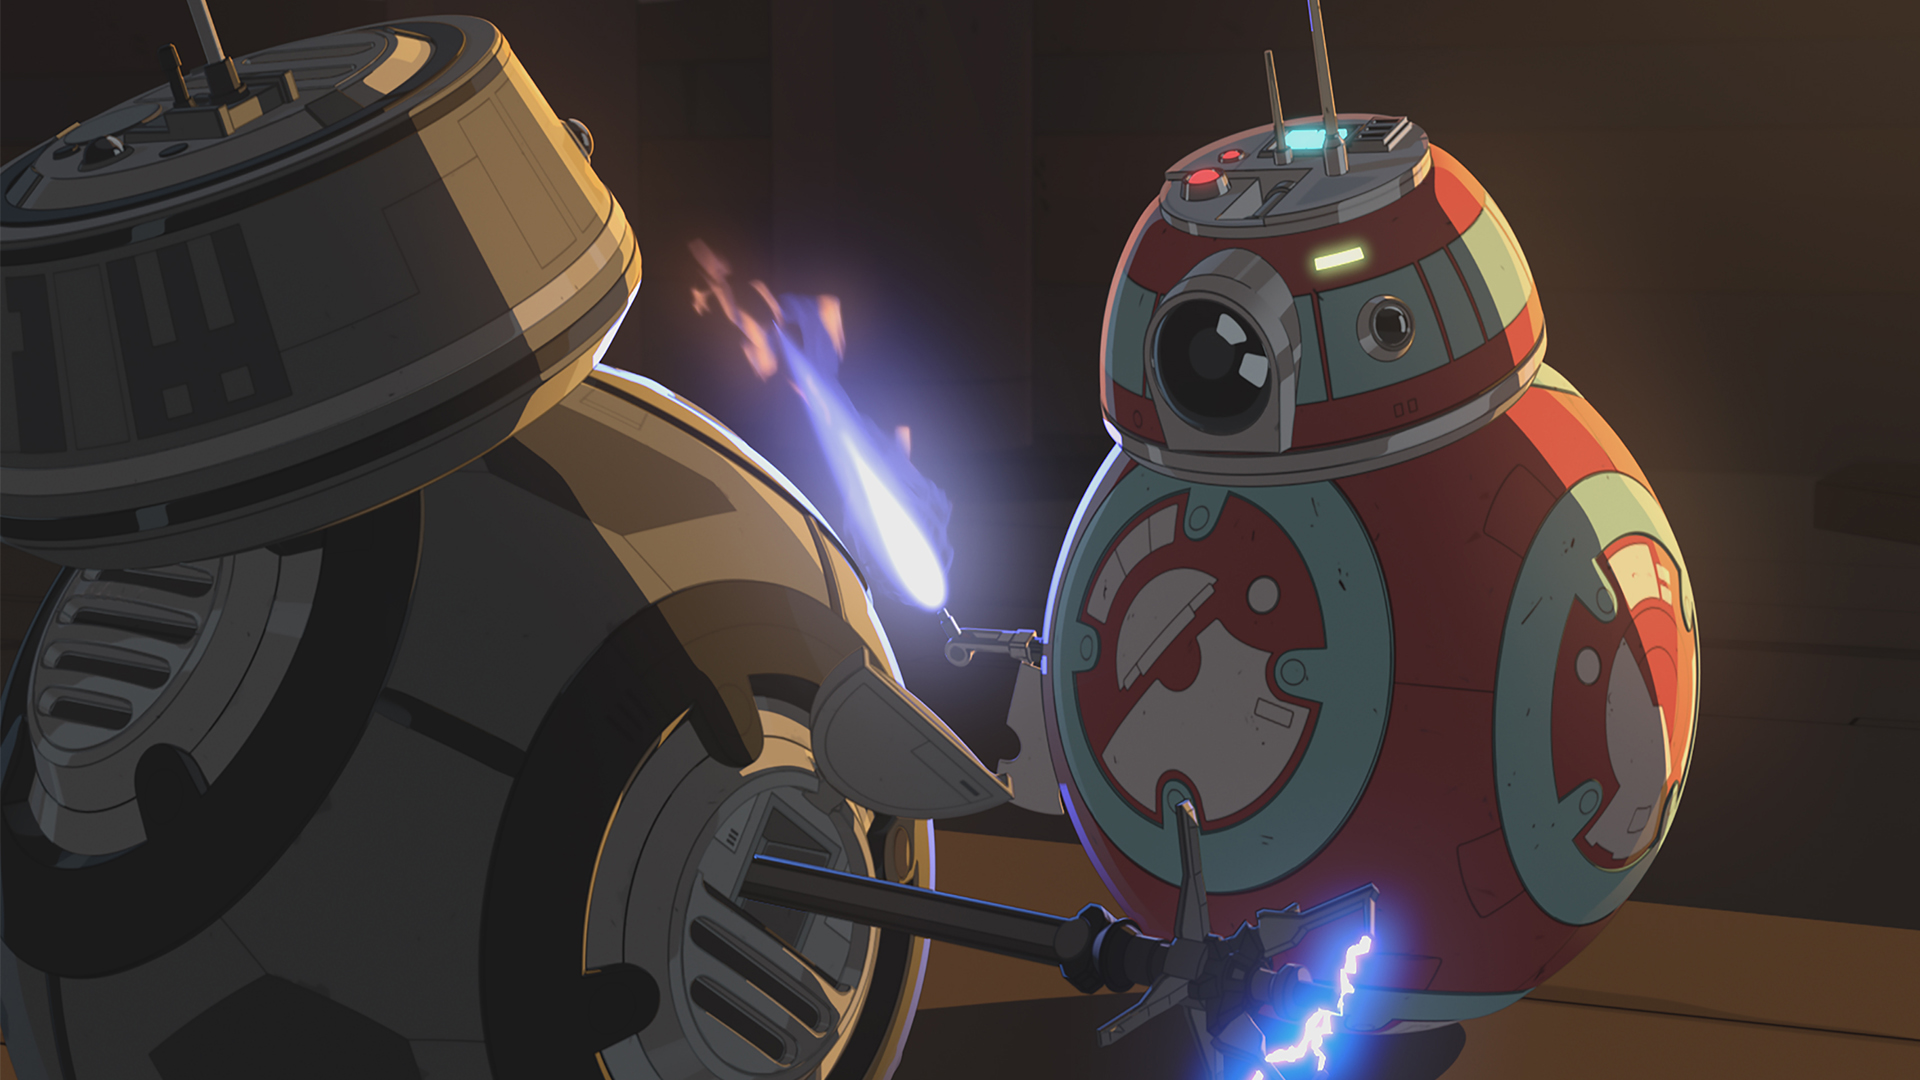 CB-23 fights a droid